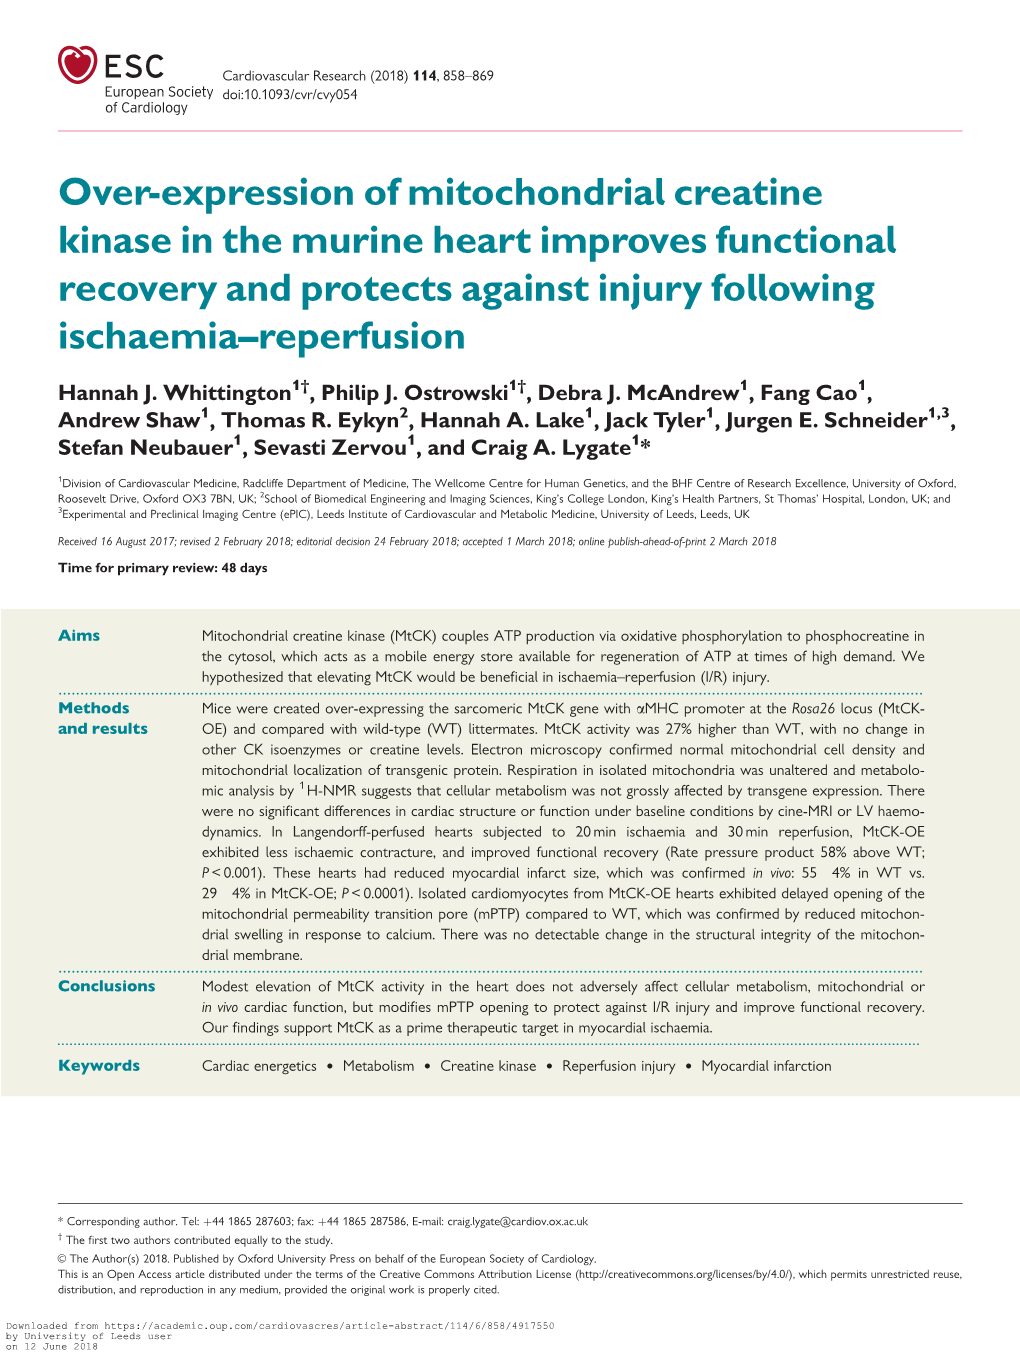 Over-Expression of Mitochondrial Creatine Kinase in the Murine Heart Improves Functional Recovery and Protects Against Injury Following Ischaemia–Reperfusion